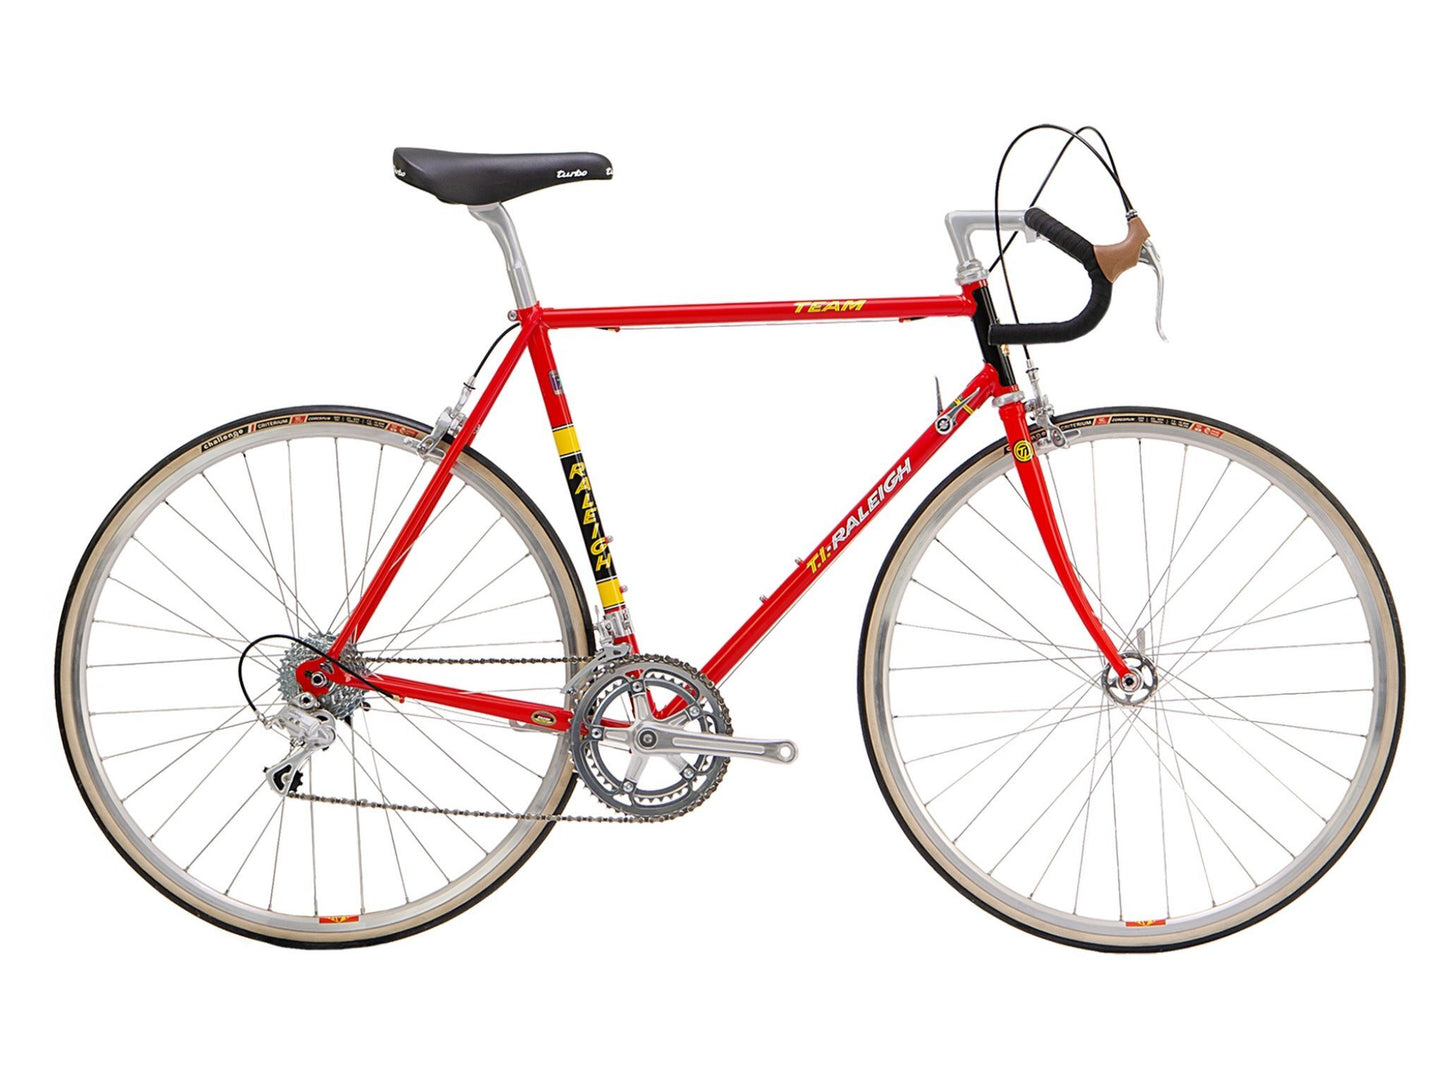 TI-Raleigh Anniversary Edition Bicycle